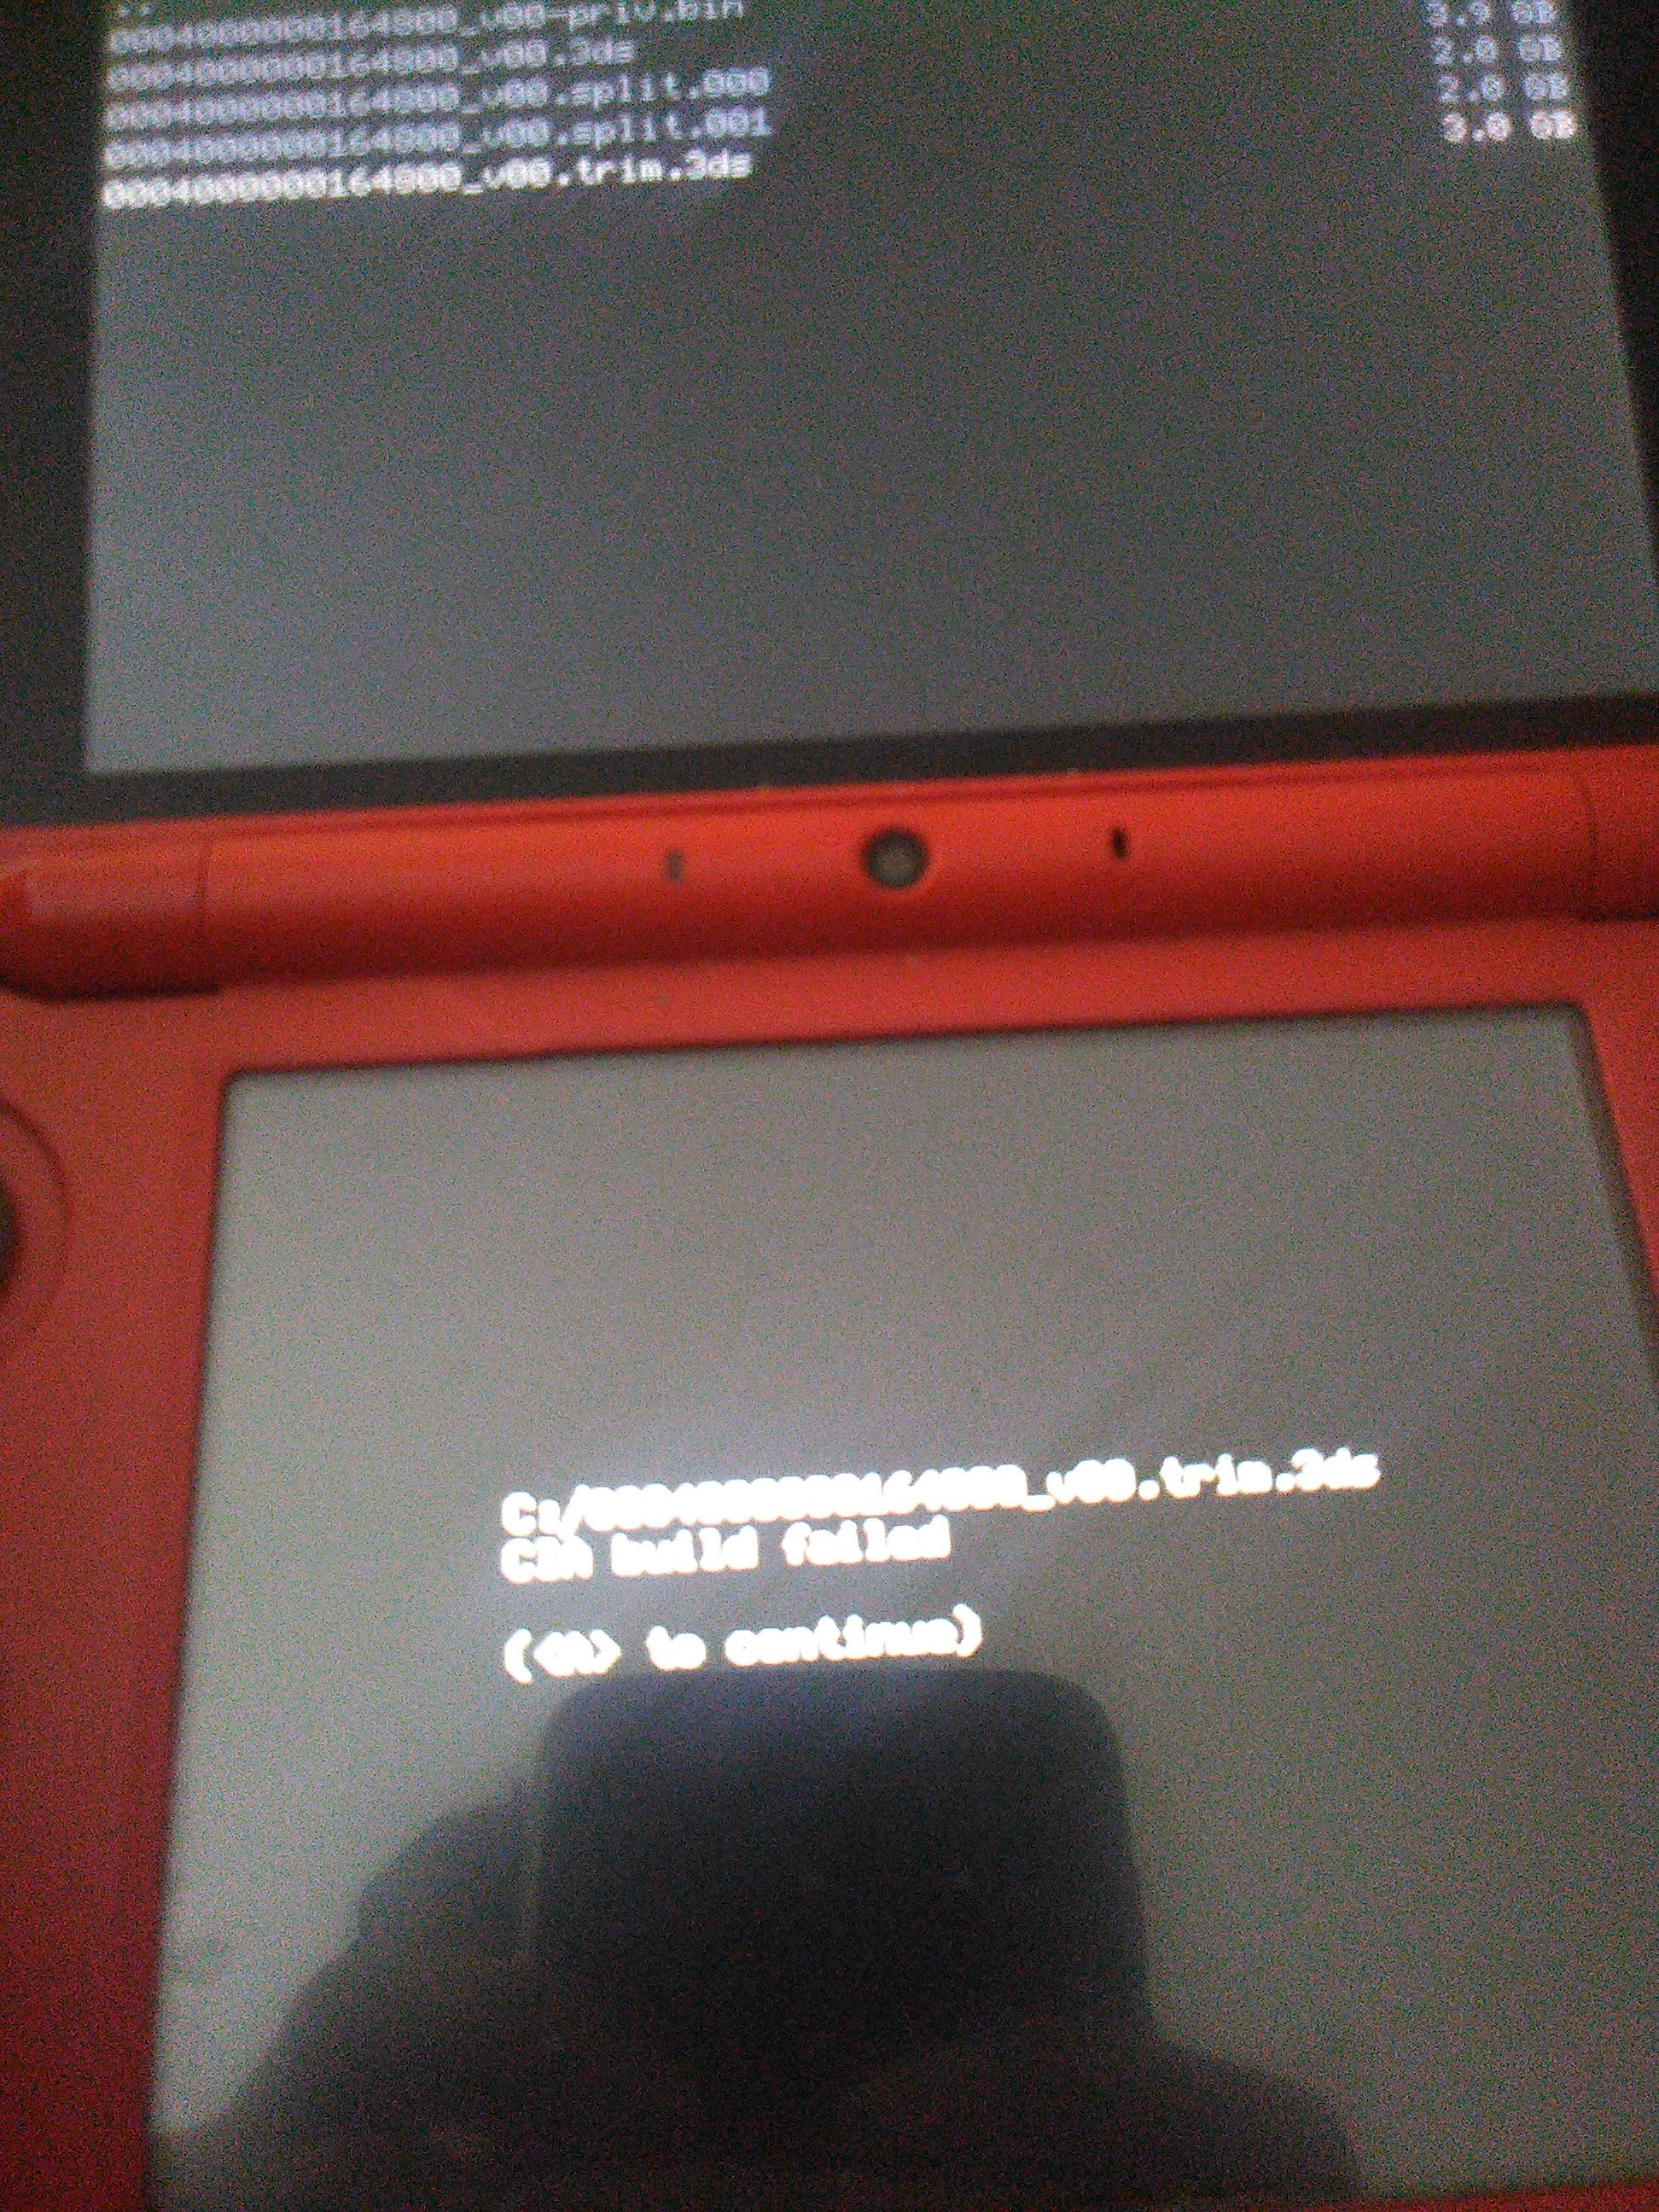 convert video to 3ds cia